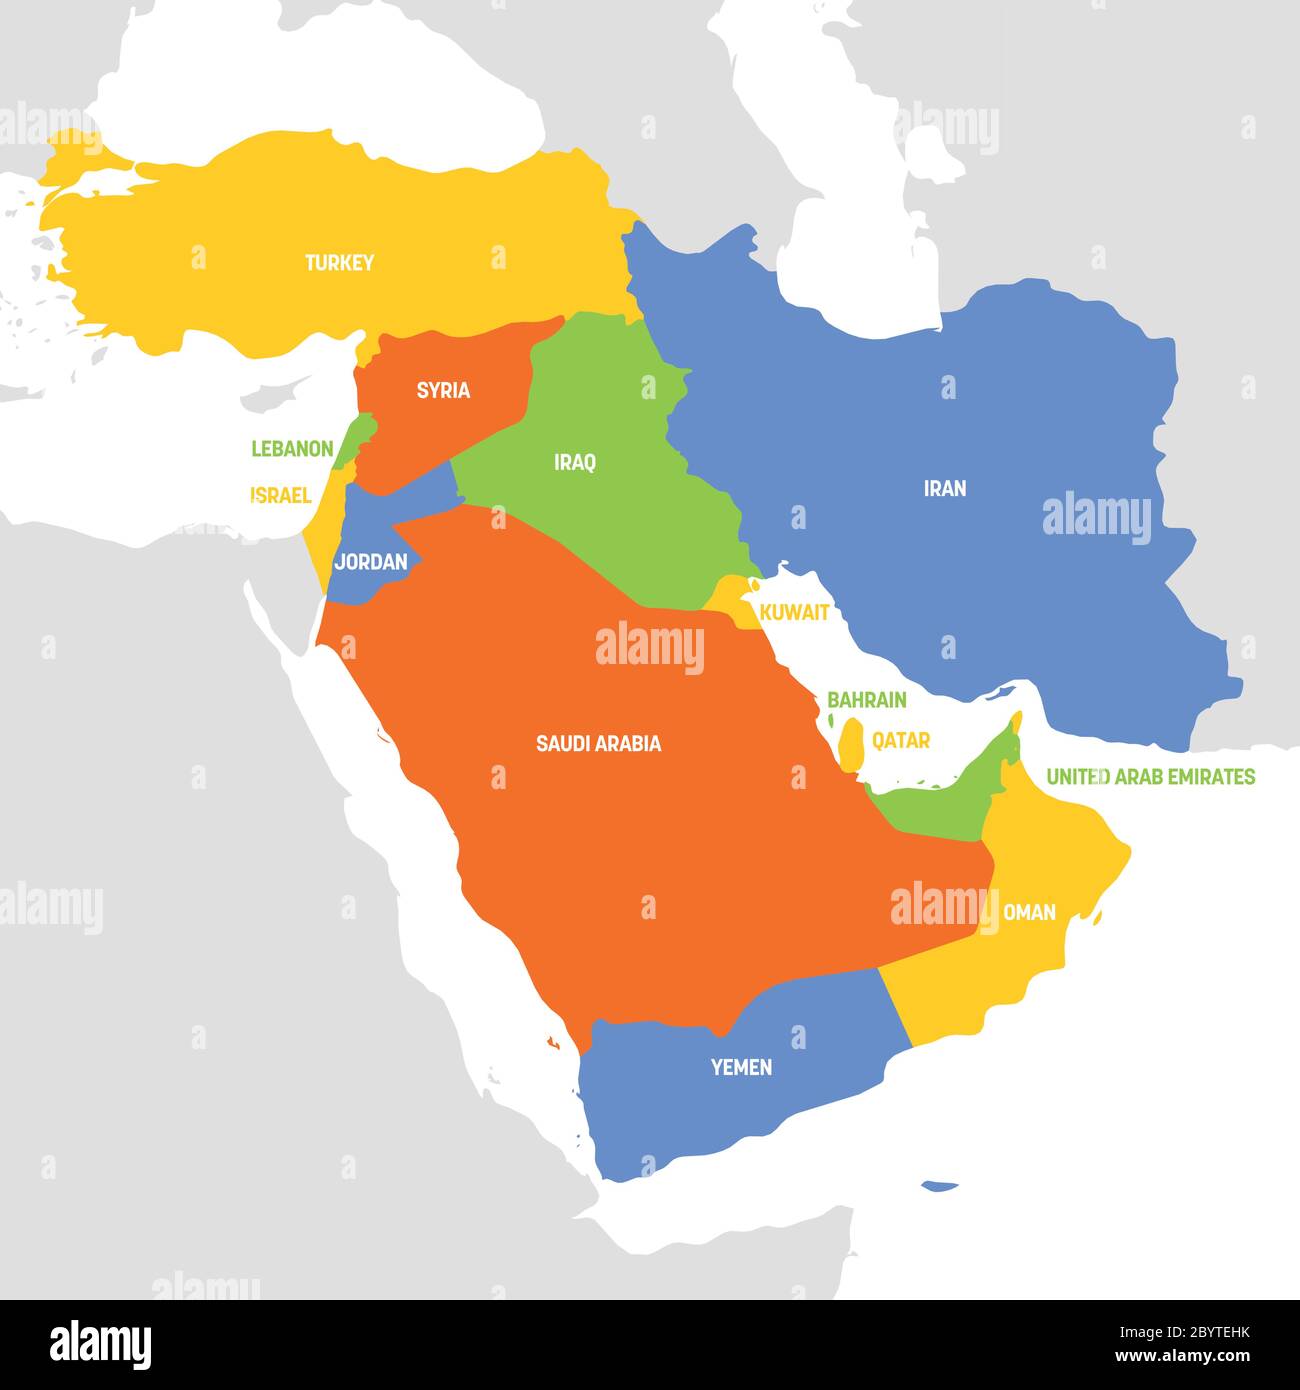 west asia political map